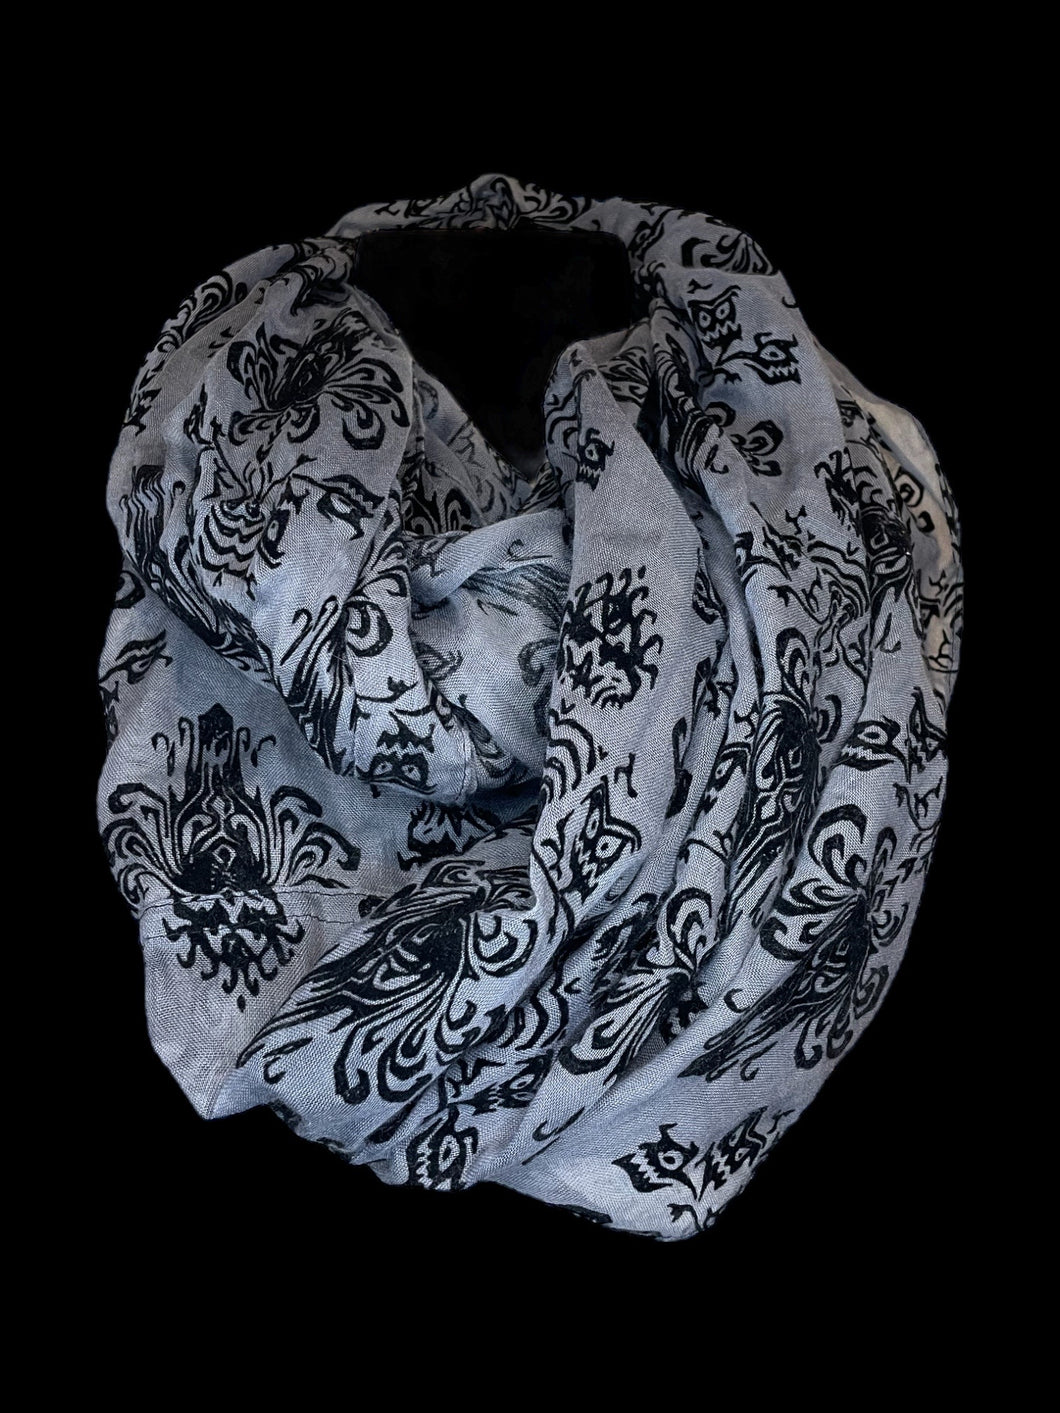 NWT Grey & black velvet “The Haunted Mansion”’ infinity scarf